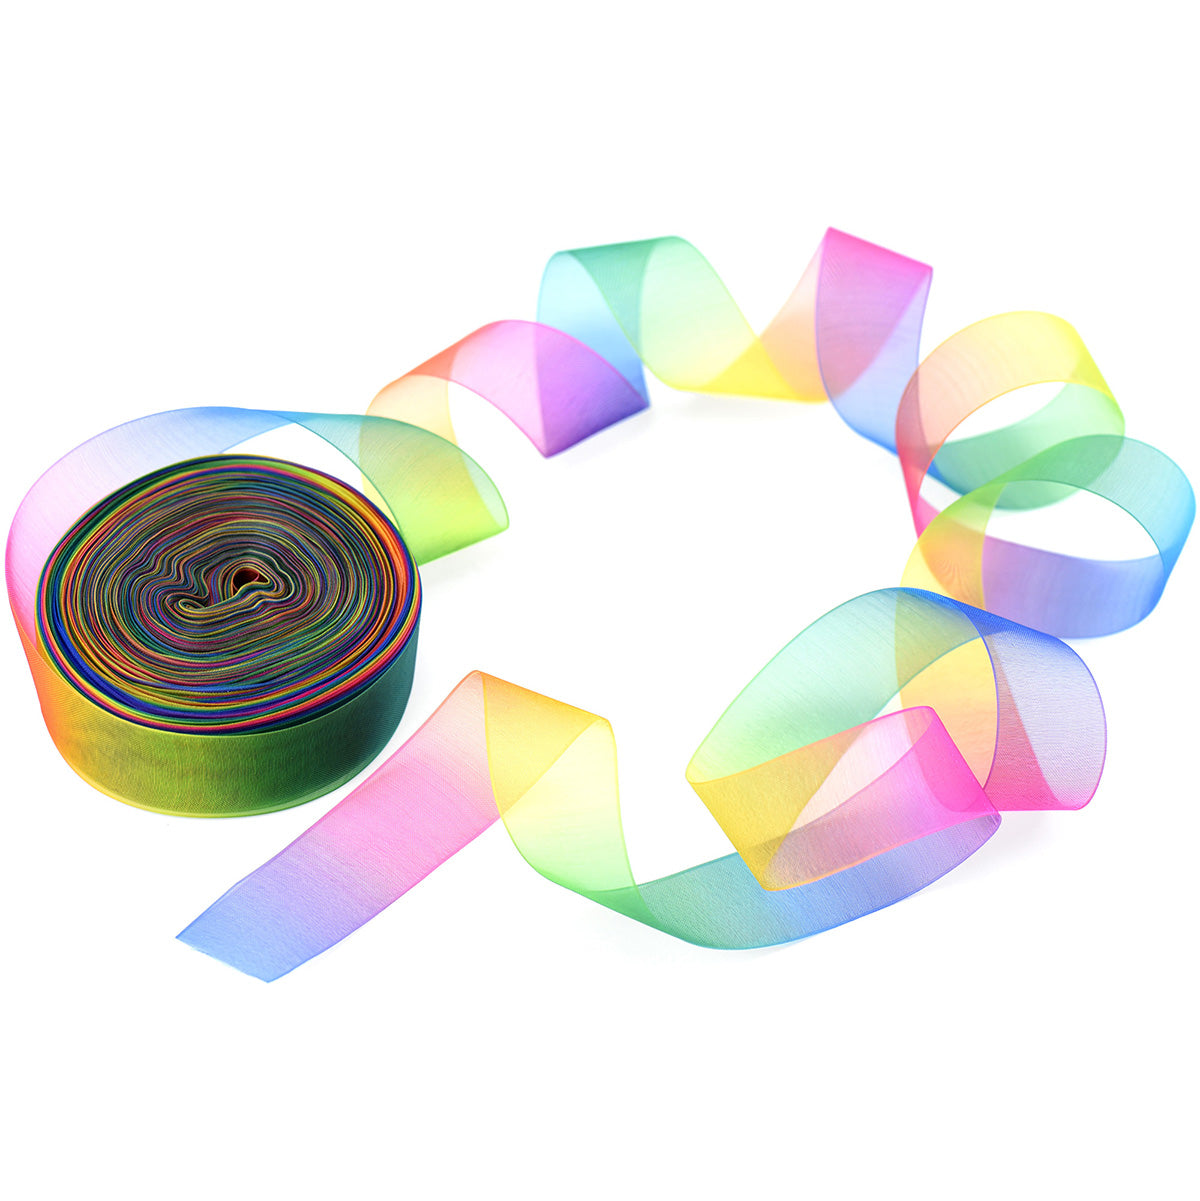 38mm [45 metres/50 Yards] Rainbow Chiffon Gradient Polyester Ribbon | Party Festive Gift Wrap Scrapbooking Decoration